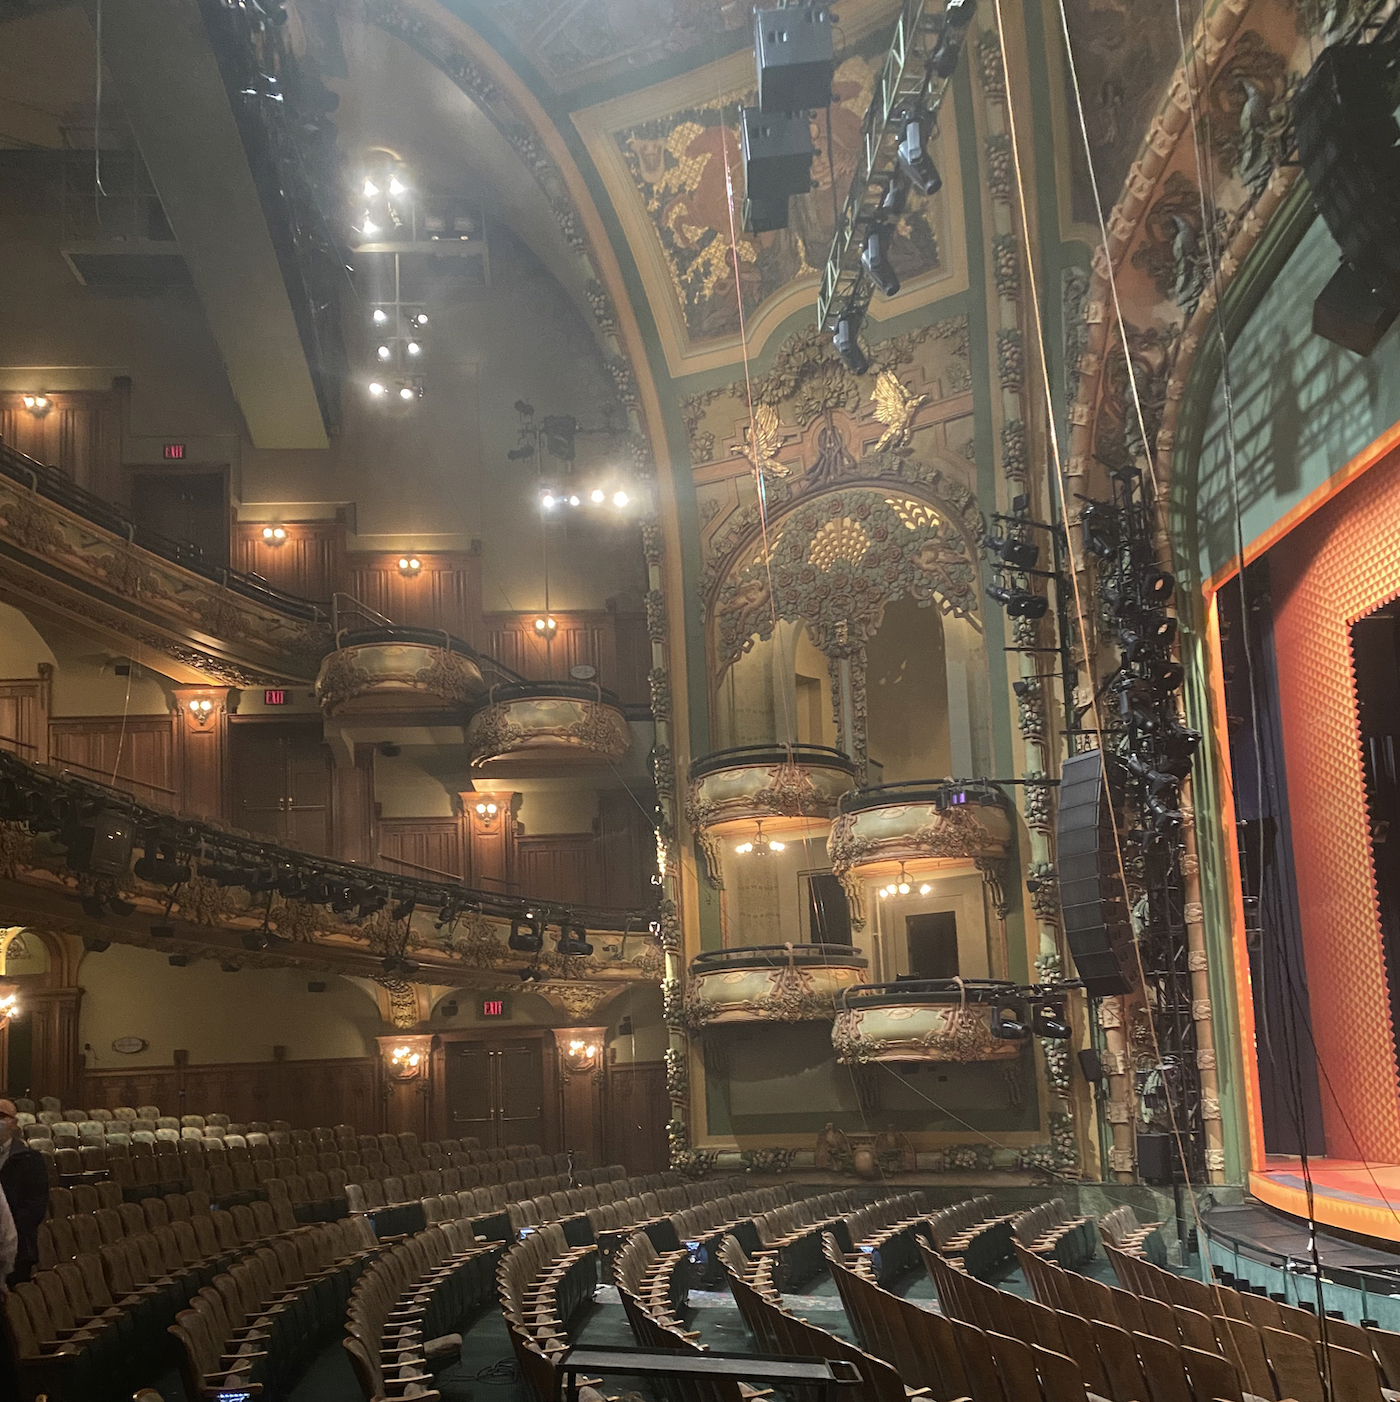 The New Amsterdam theater in New York City was the setting last year for a two-week-long engineering assessment of the distribution and control of Grignard Pure through the theater’s HVAC system.